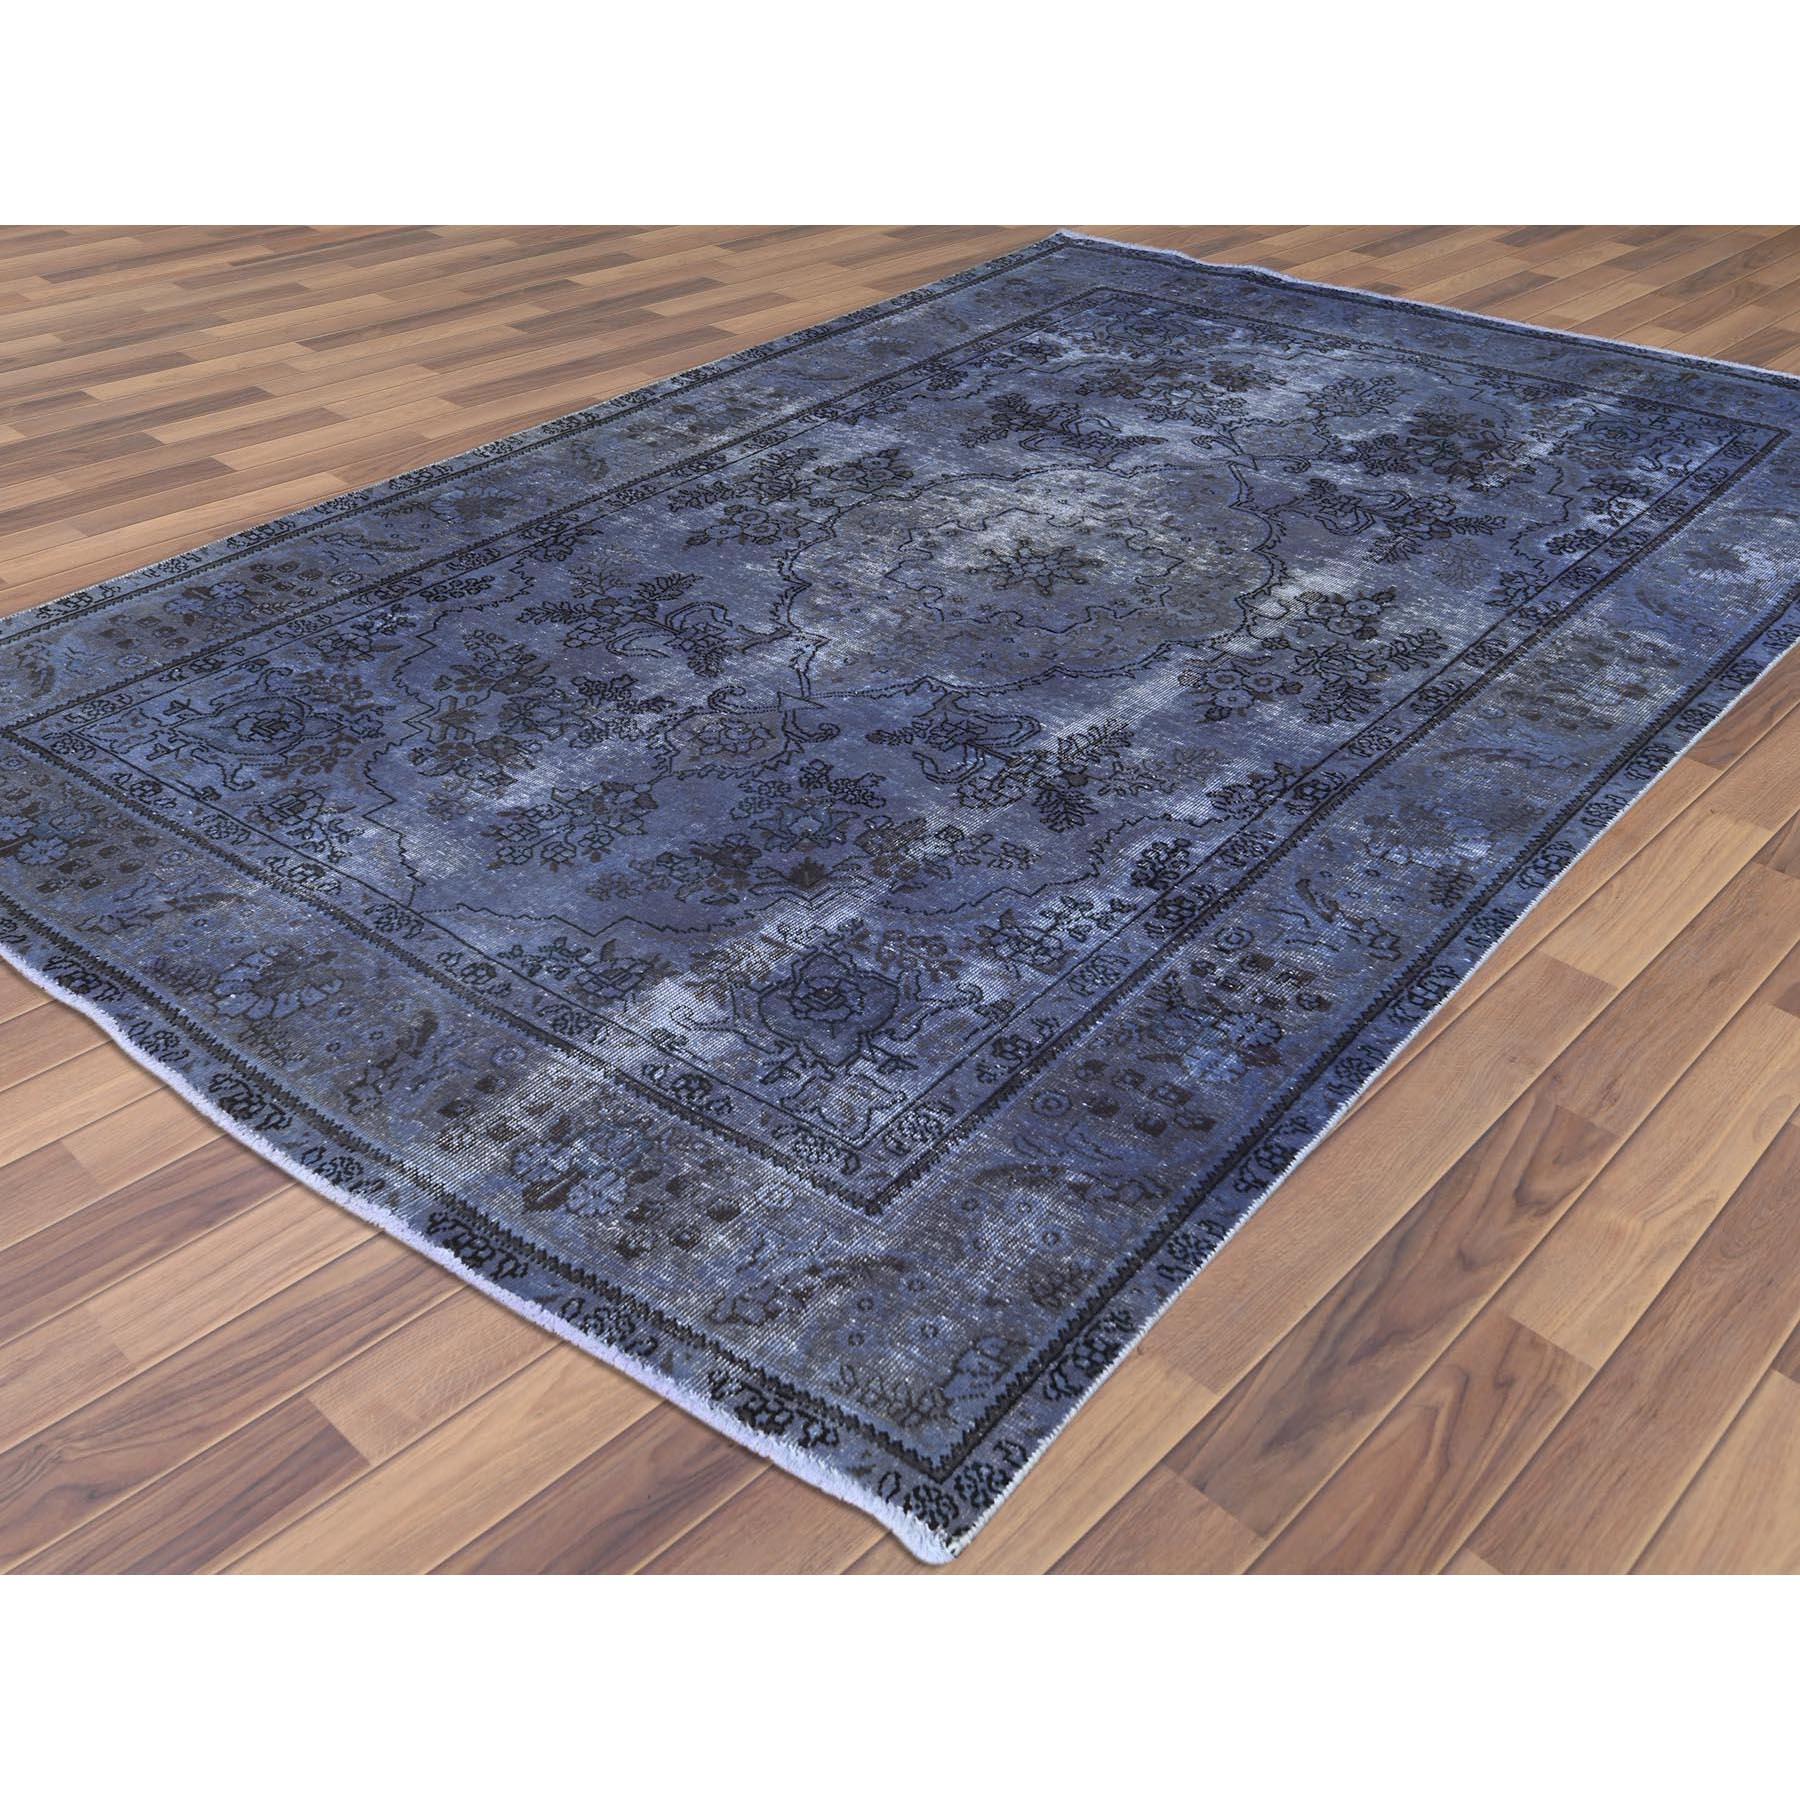 Purple Vintage Overdyed Persian Tabriz Distressed Worn Wool Hand Knotted Rug In Good Condition For Sale In Carlstadt, NJ